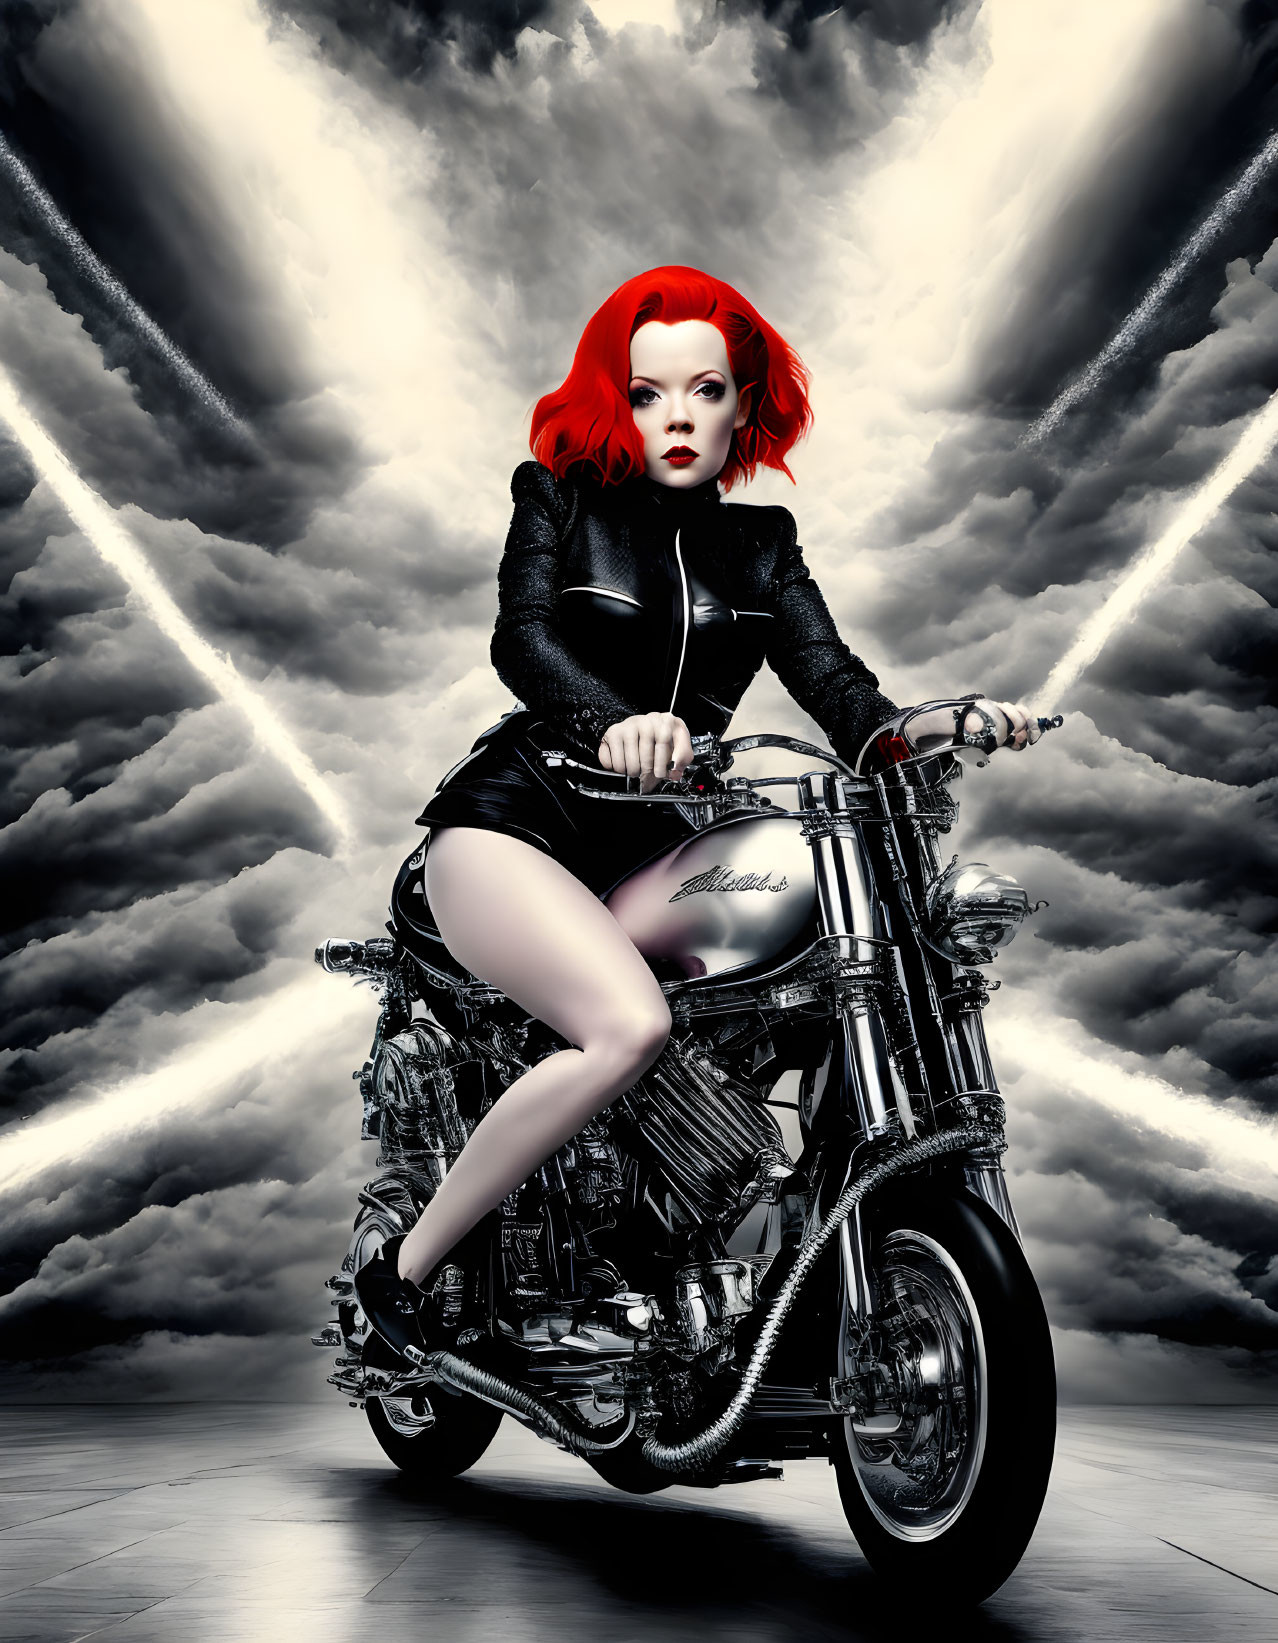 Red-haired woman in black rides motorcycle under dramatic sky